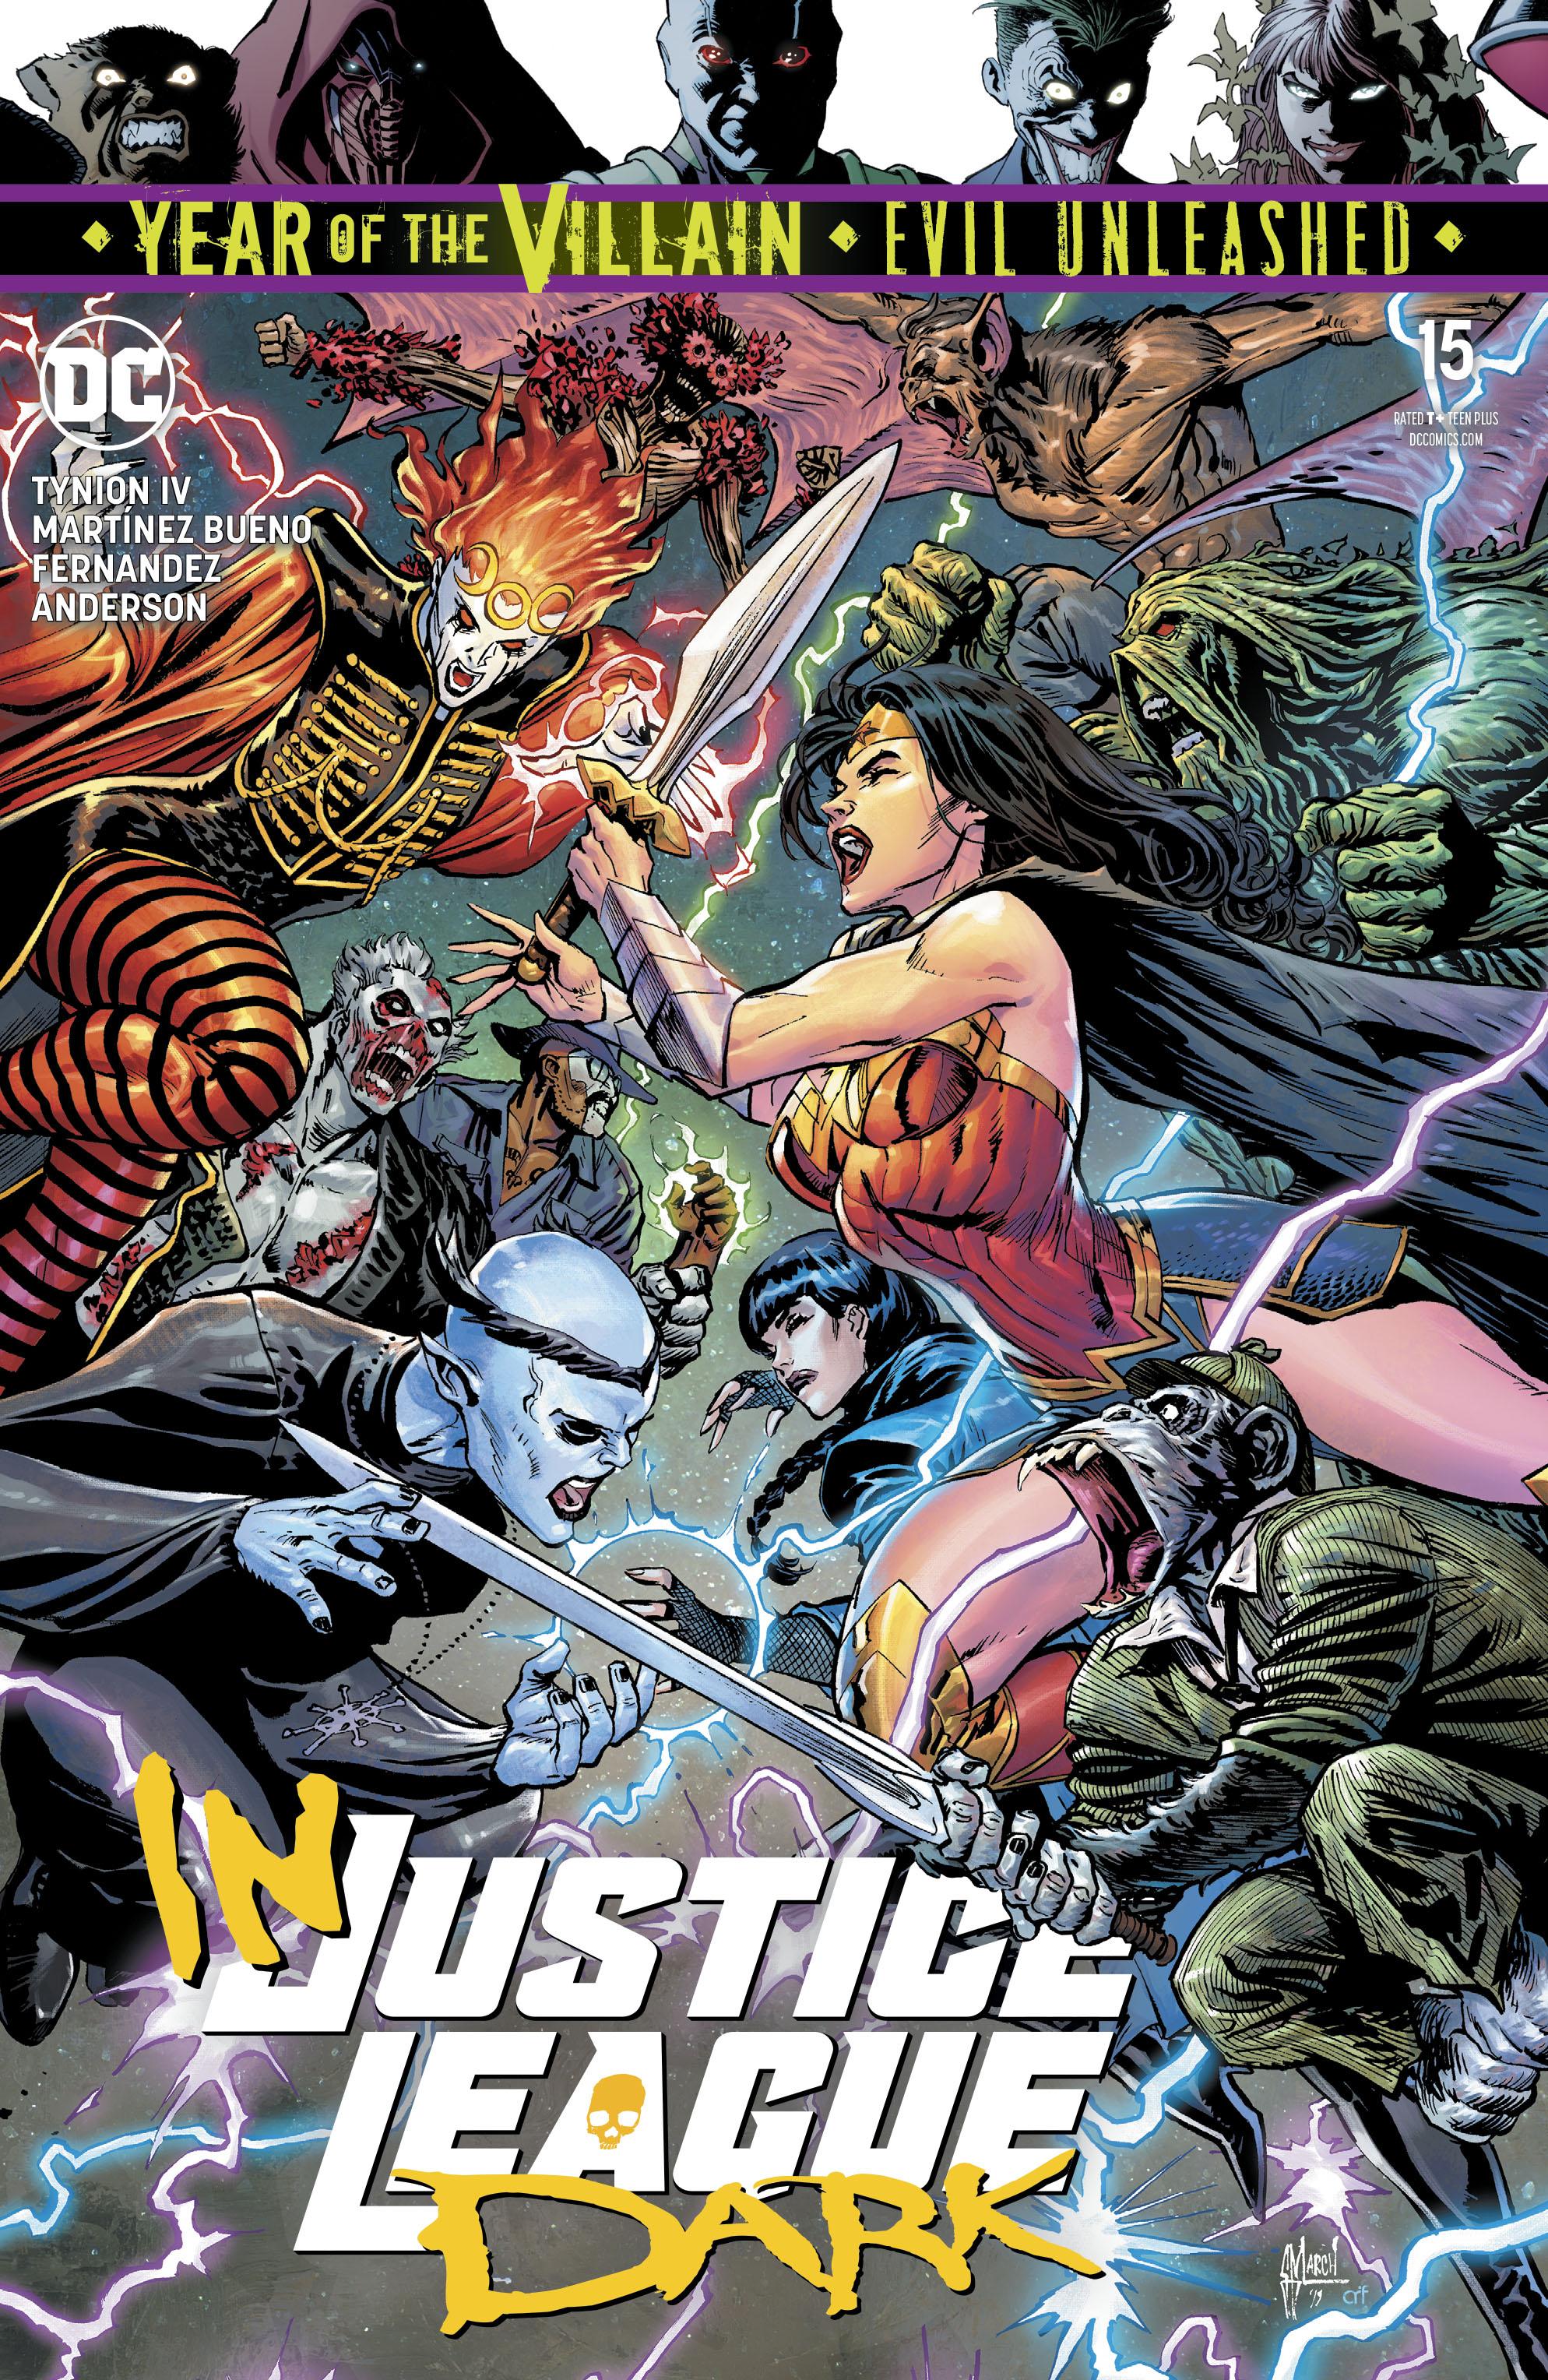 Justice League Dark #15 Year of the Villain Evil Unleashed (2018)